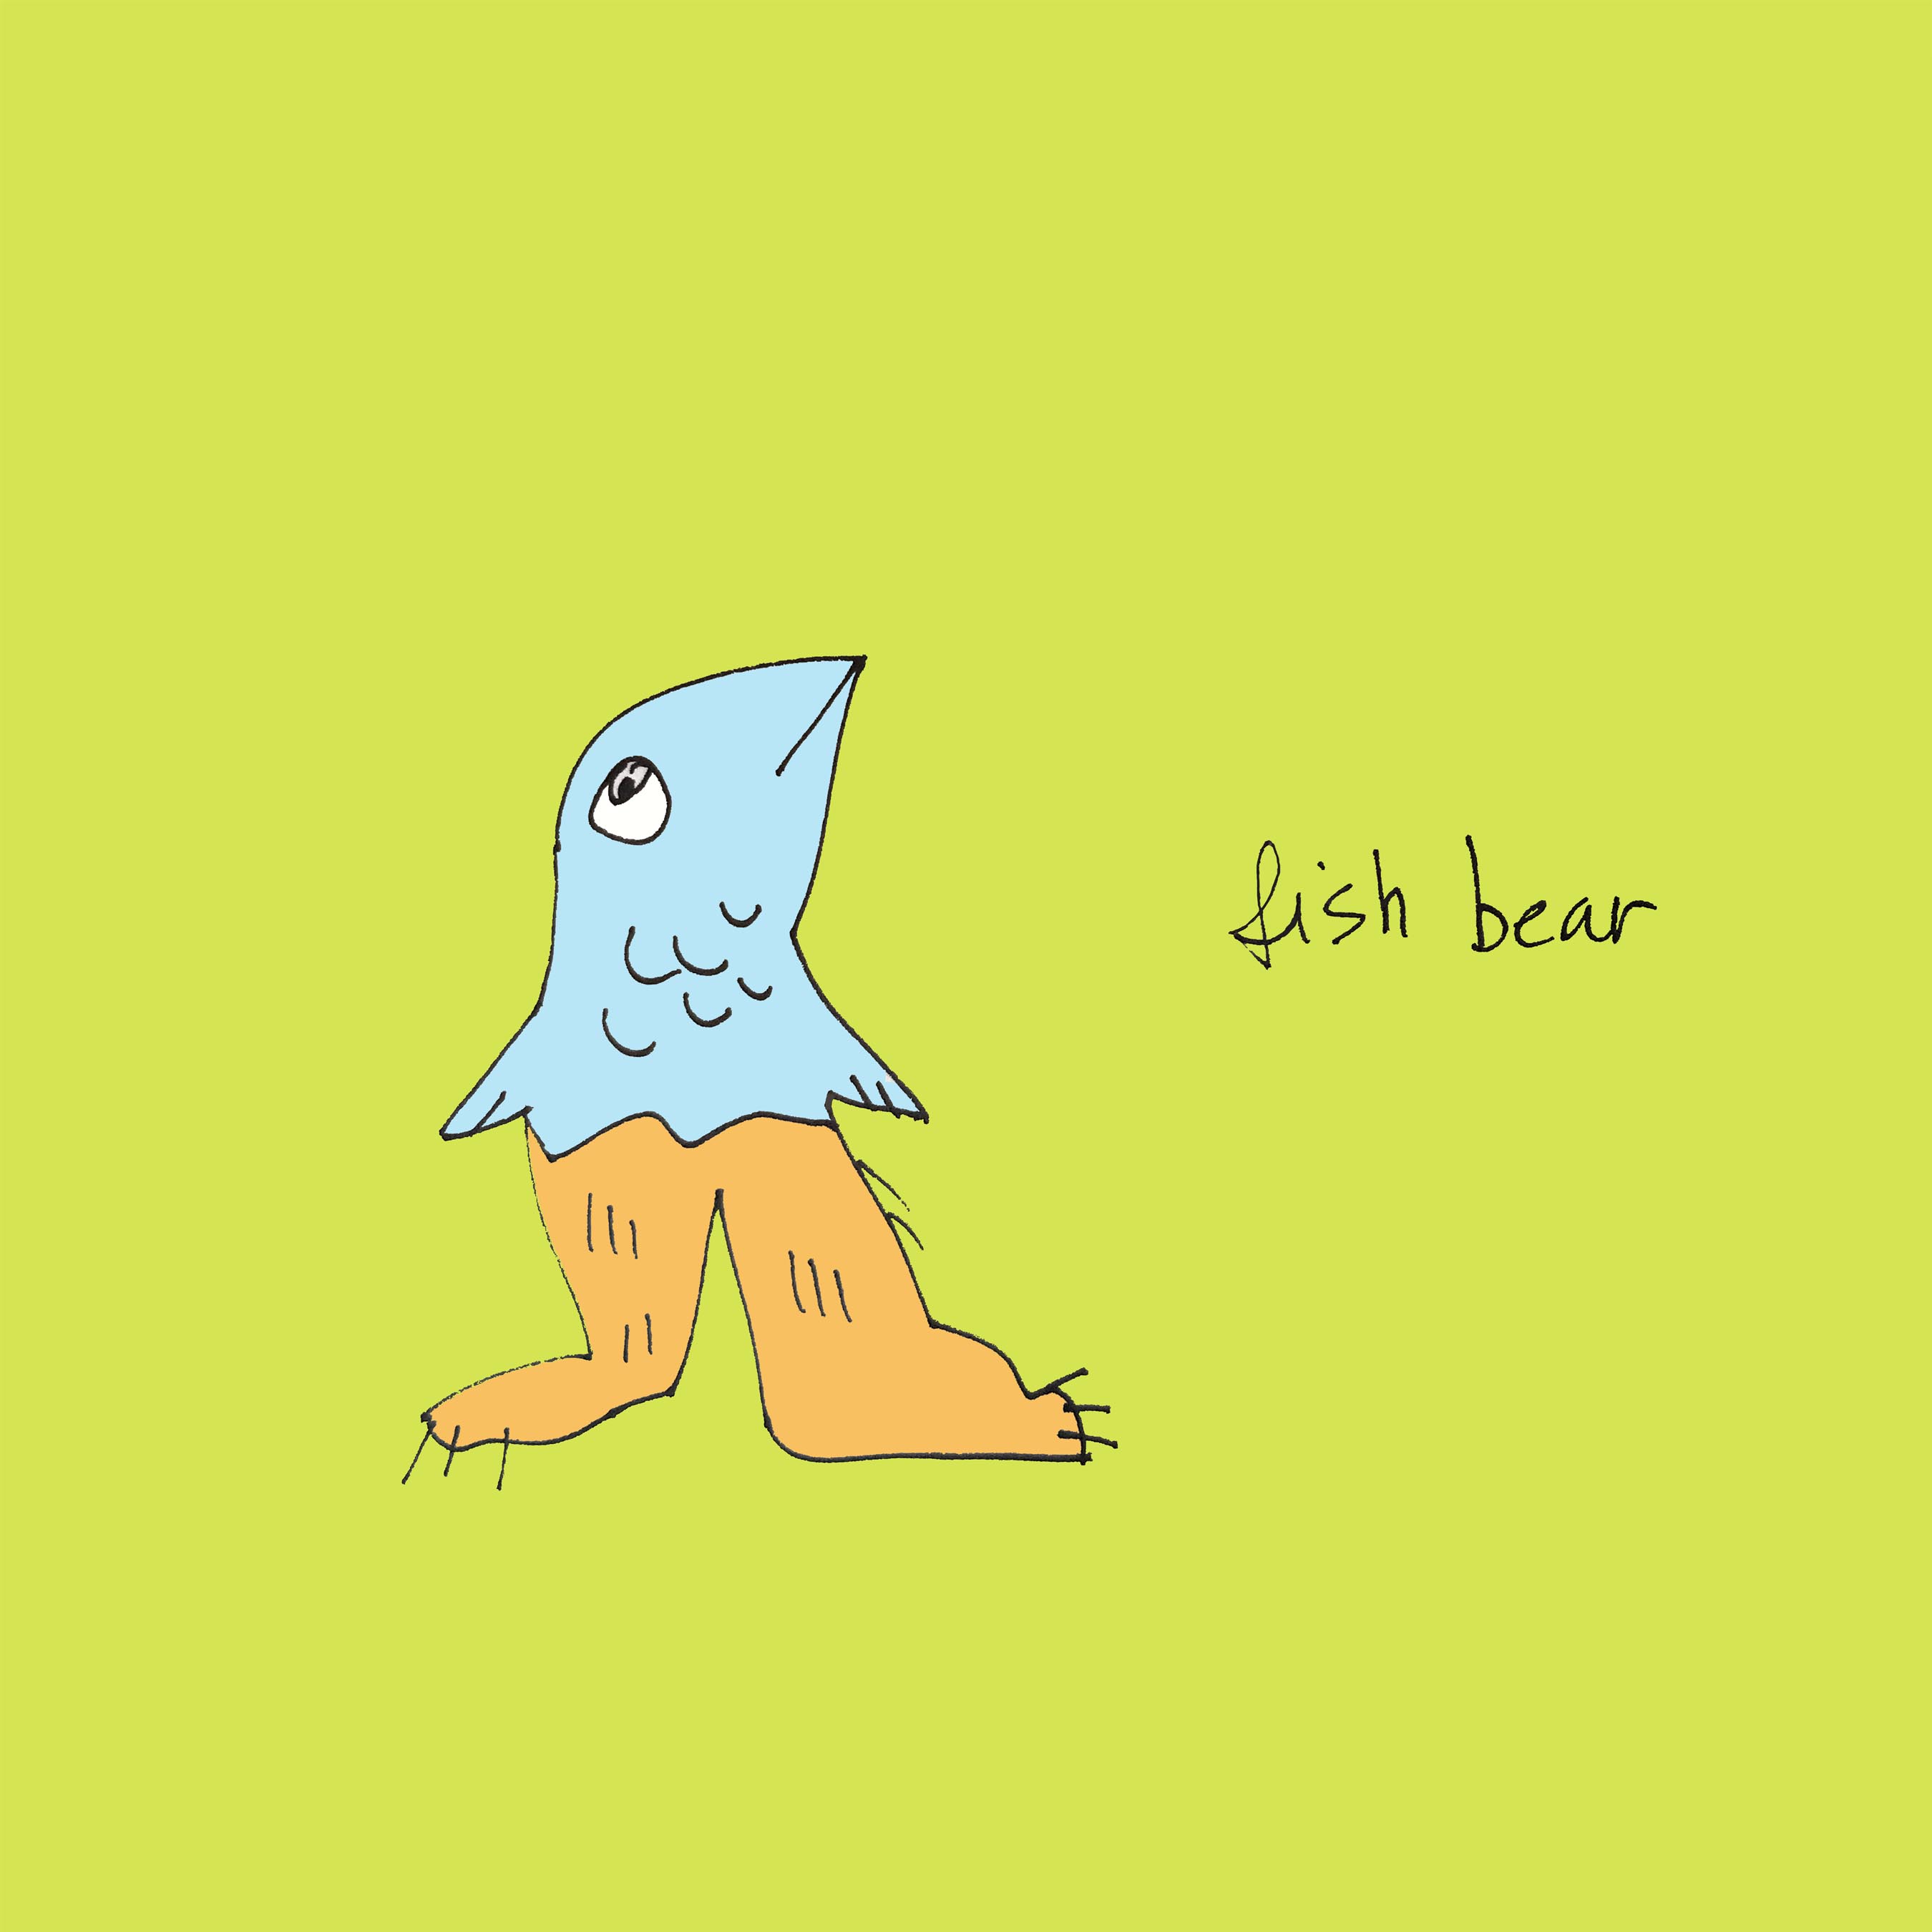 art every day number 321 / illustration / fishbear